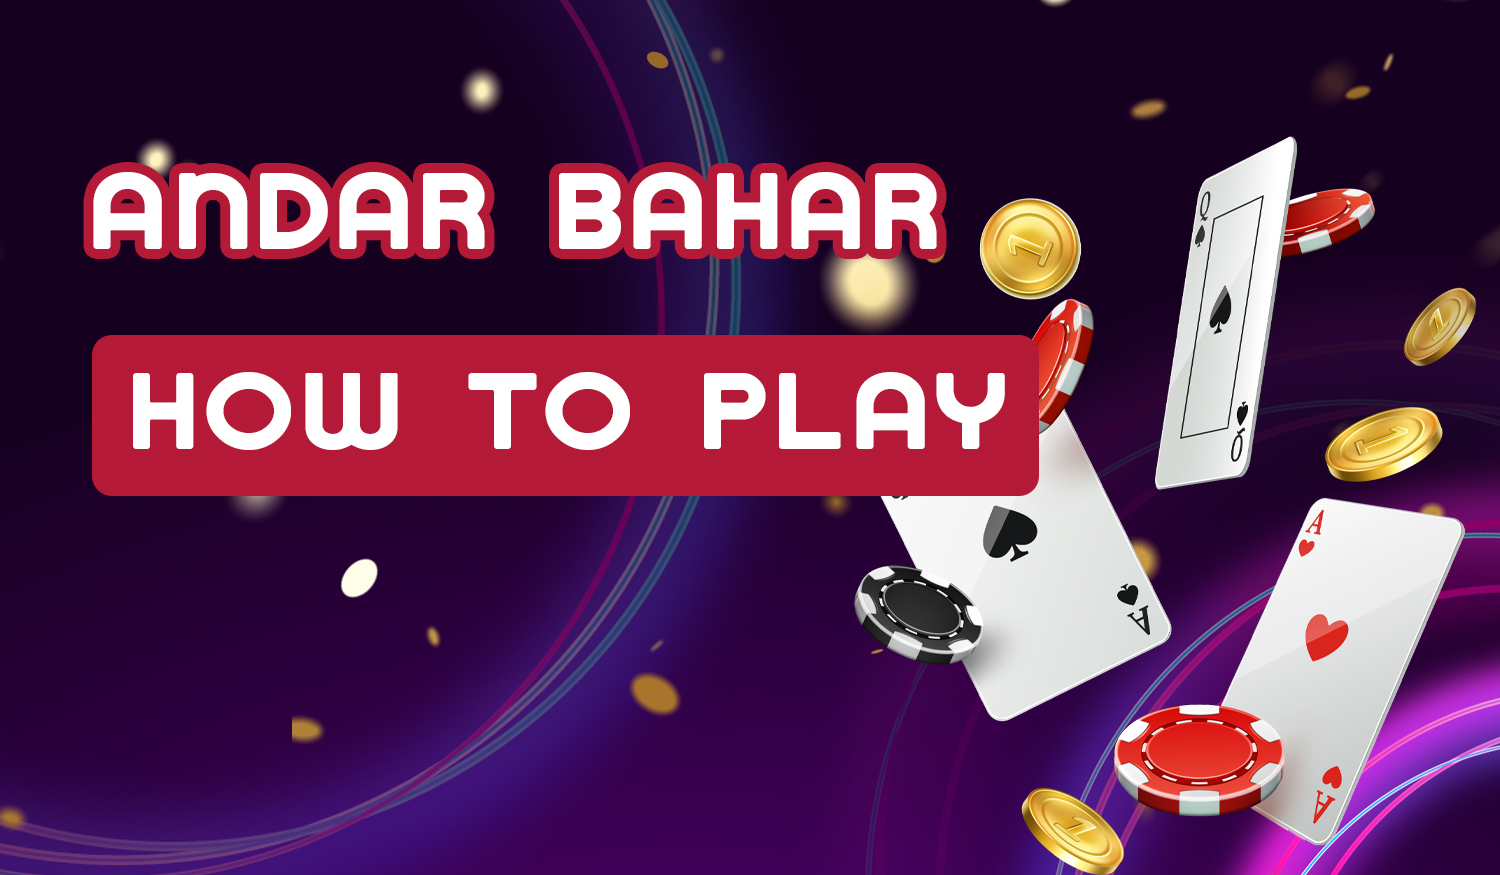 Step by step instructions on how to start playing Andar Bahar online